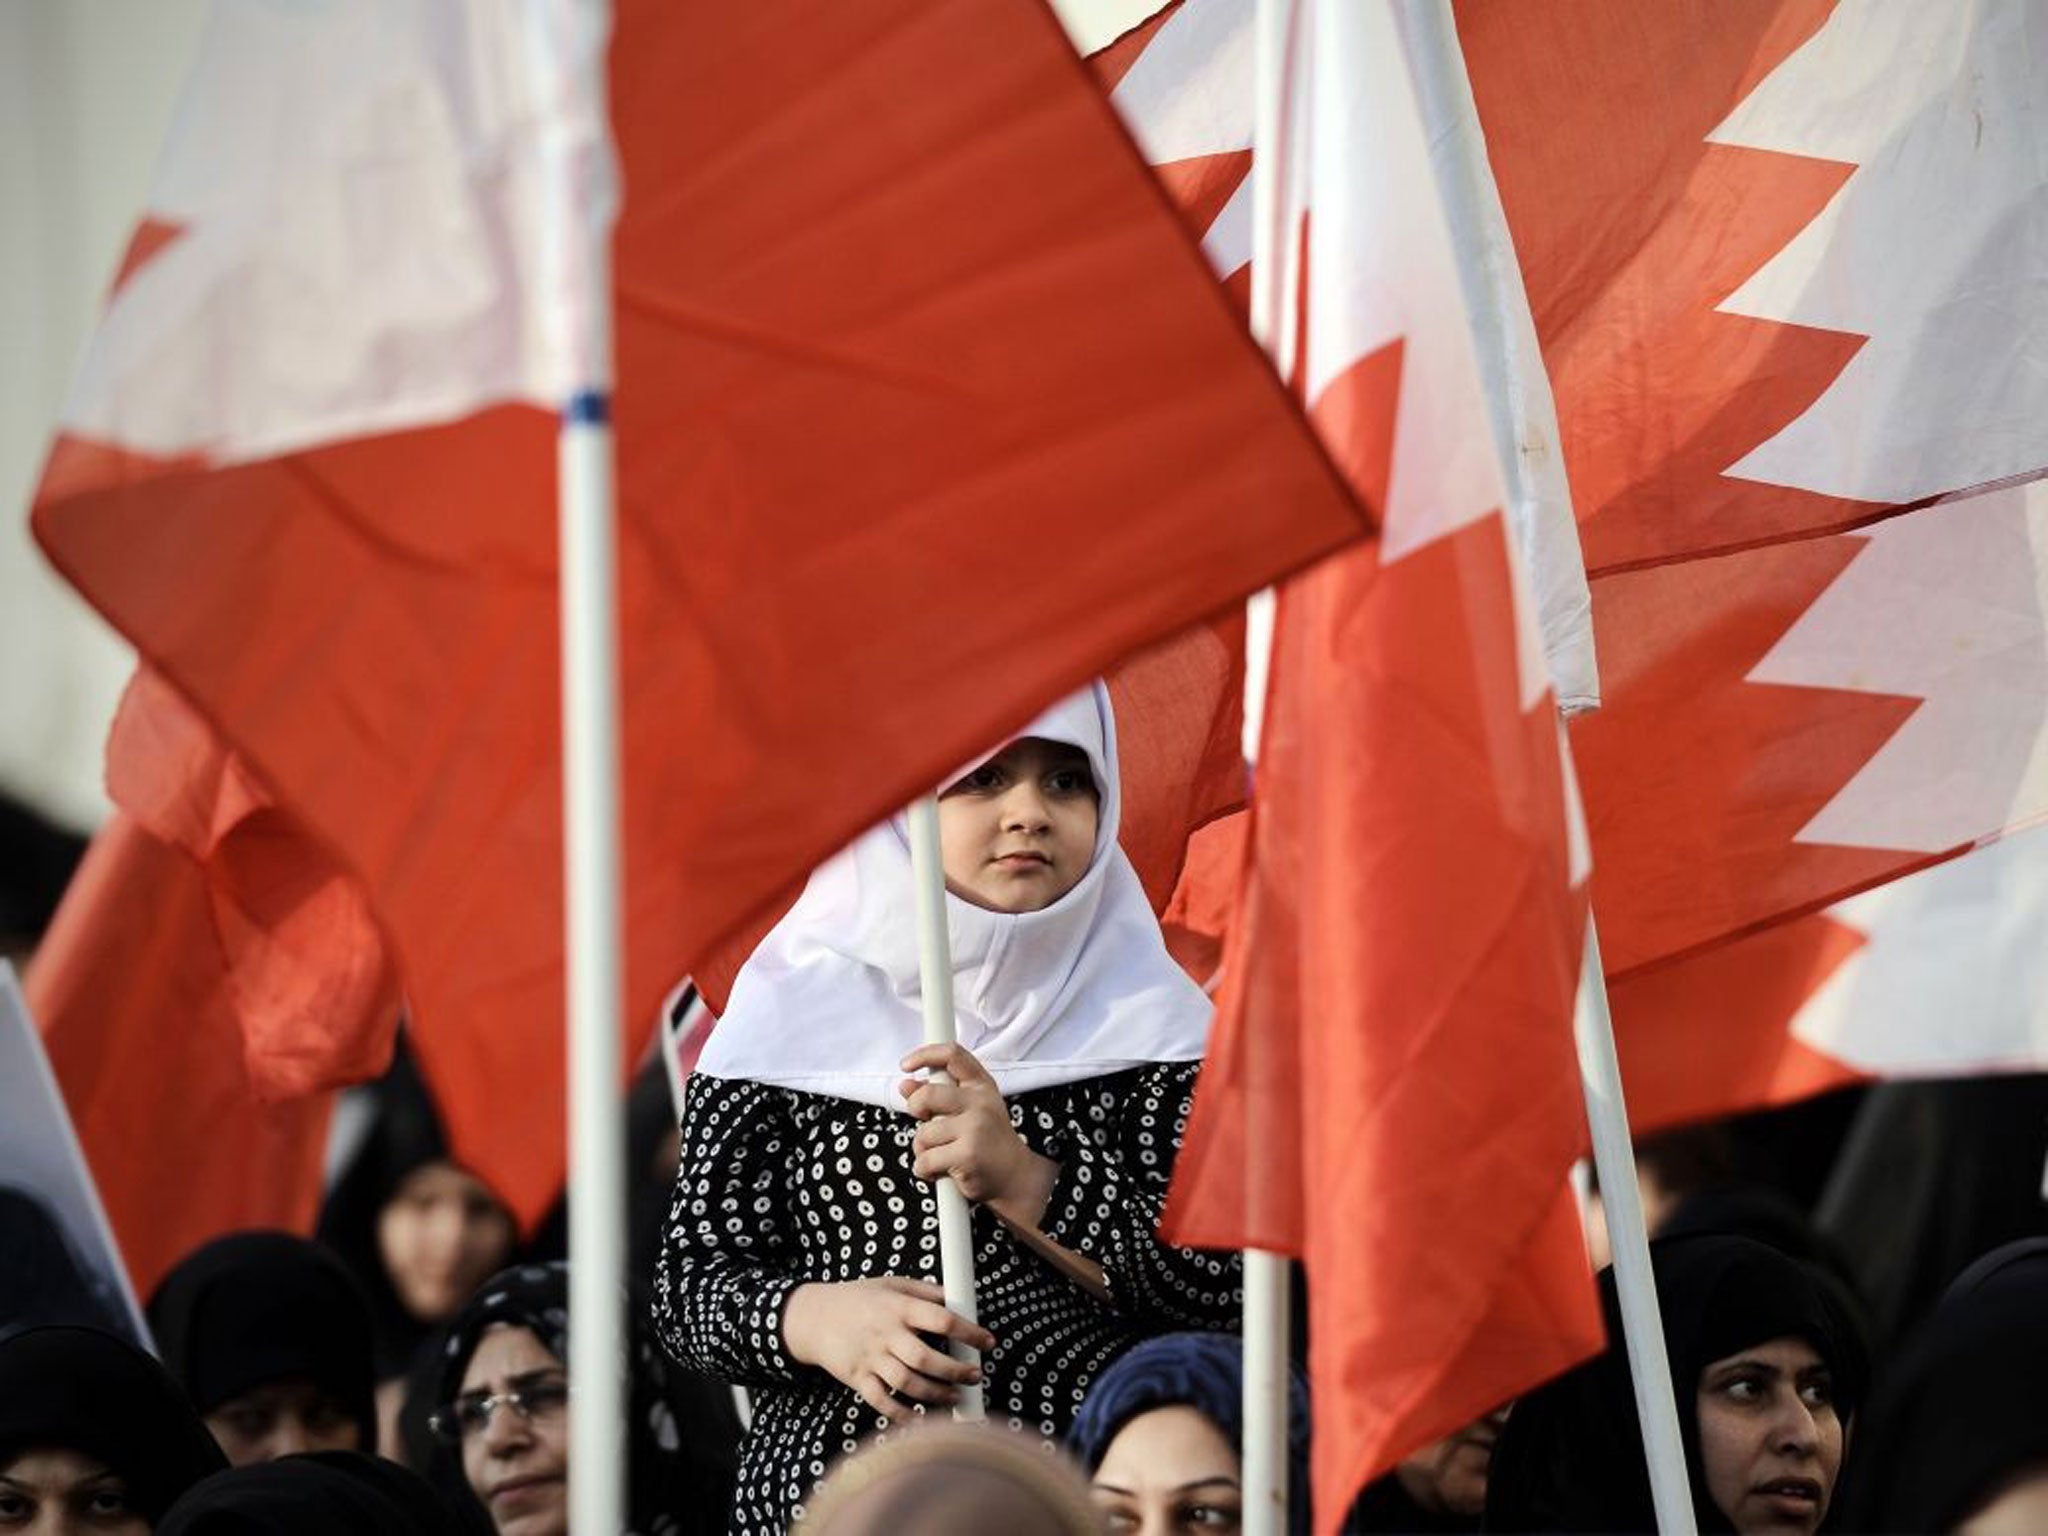 On the march: protesters in Bahrain this month, where the Sunni monarchy repeatedly asserted that it saw an Iranian hand behind the Arab Spring protests in 2011